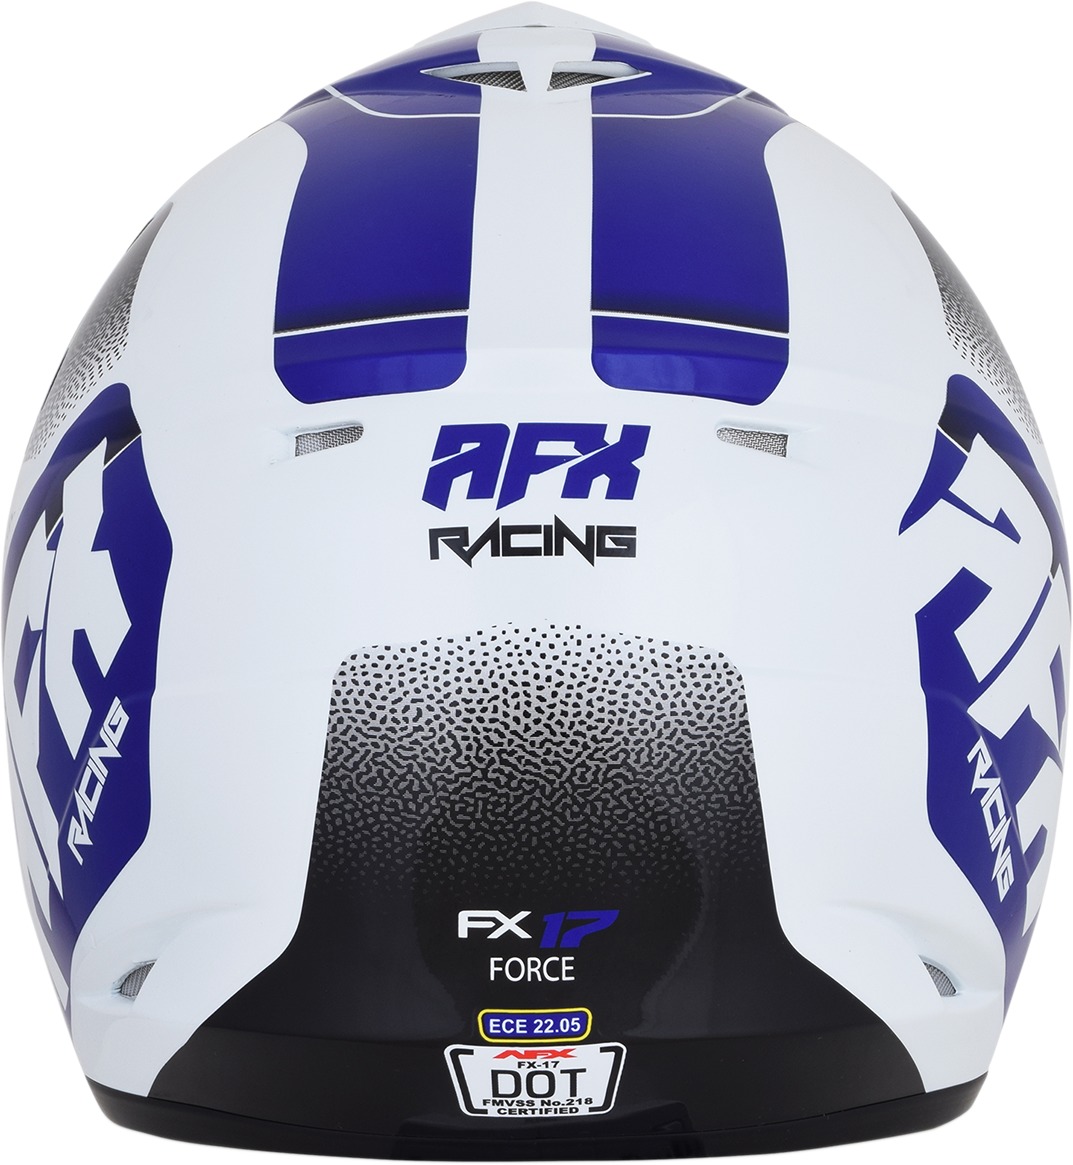 FX-17 Force Full Face Offroad Helmet Blue/White/Black Small - Click Image to Close